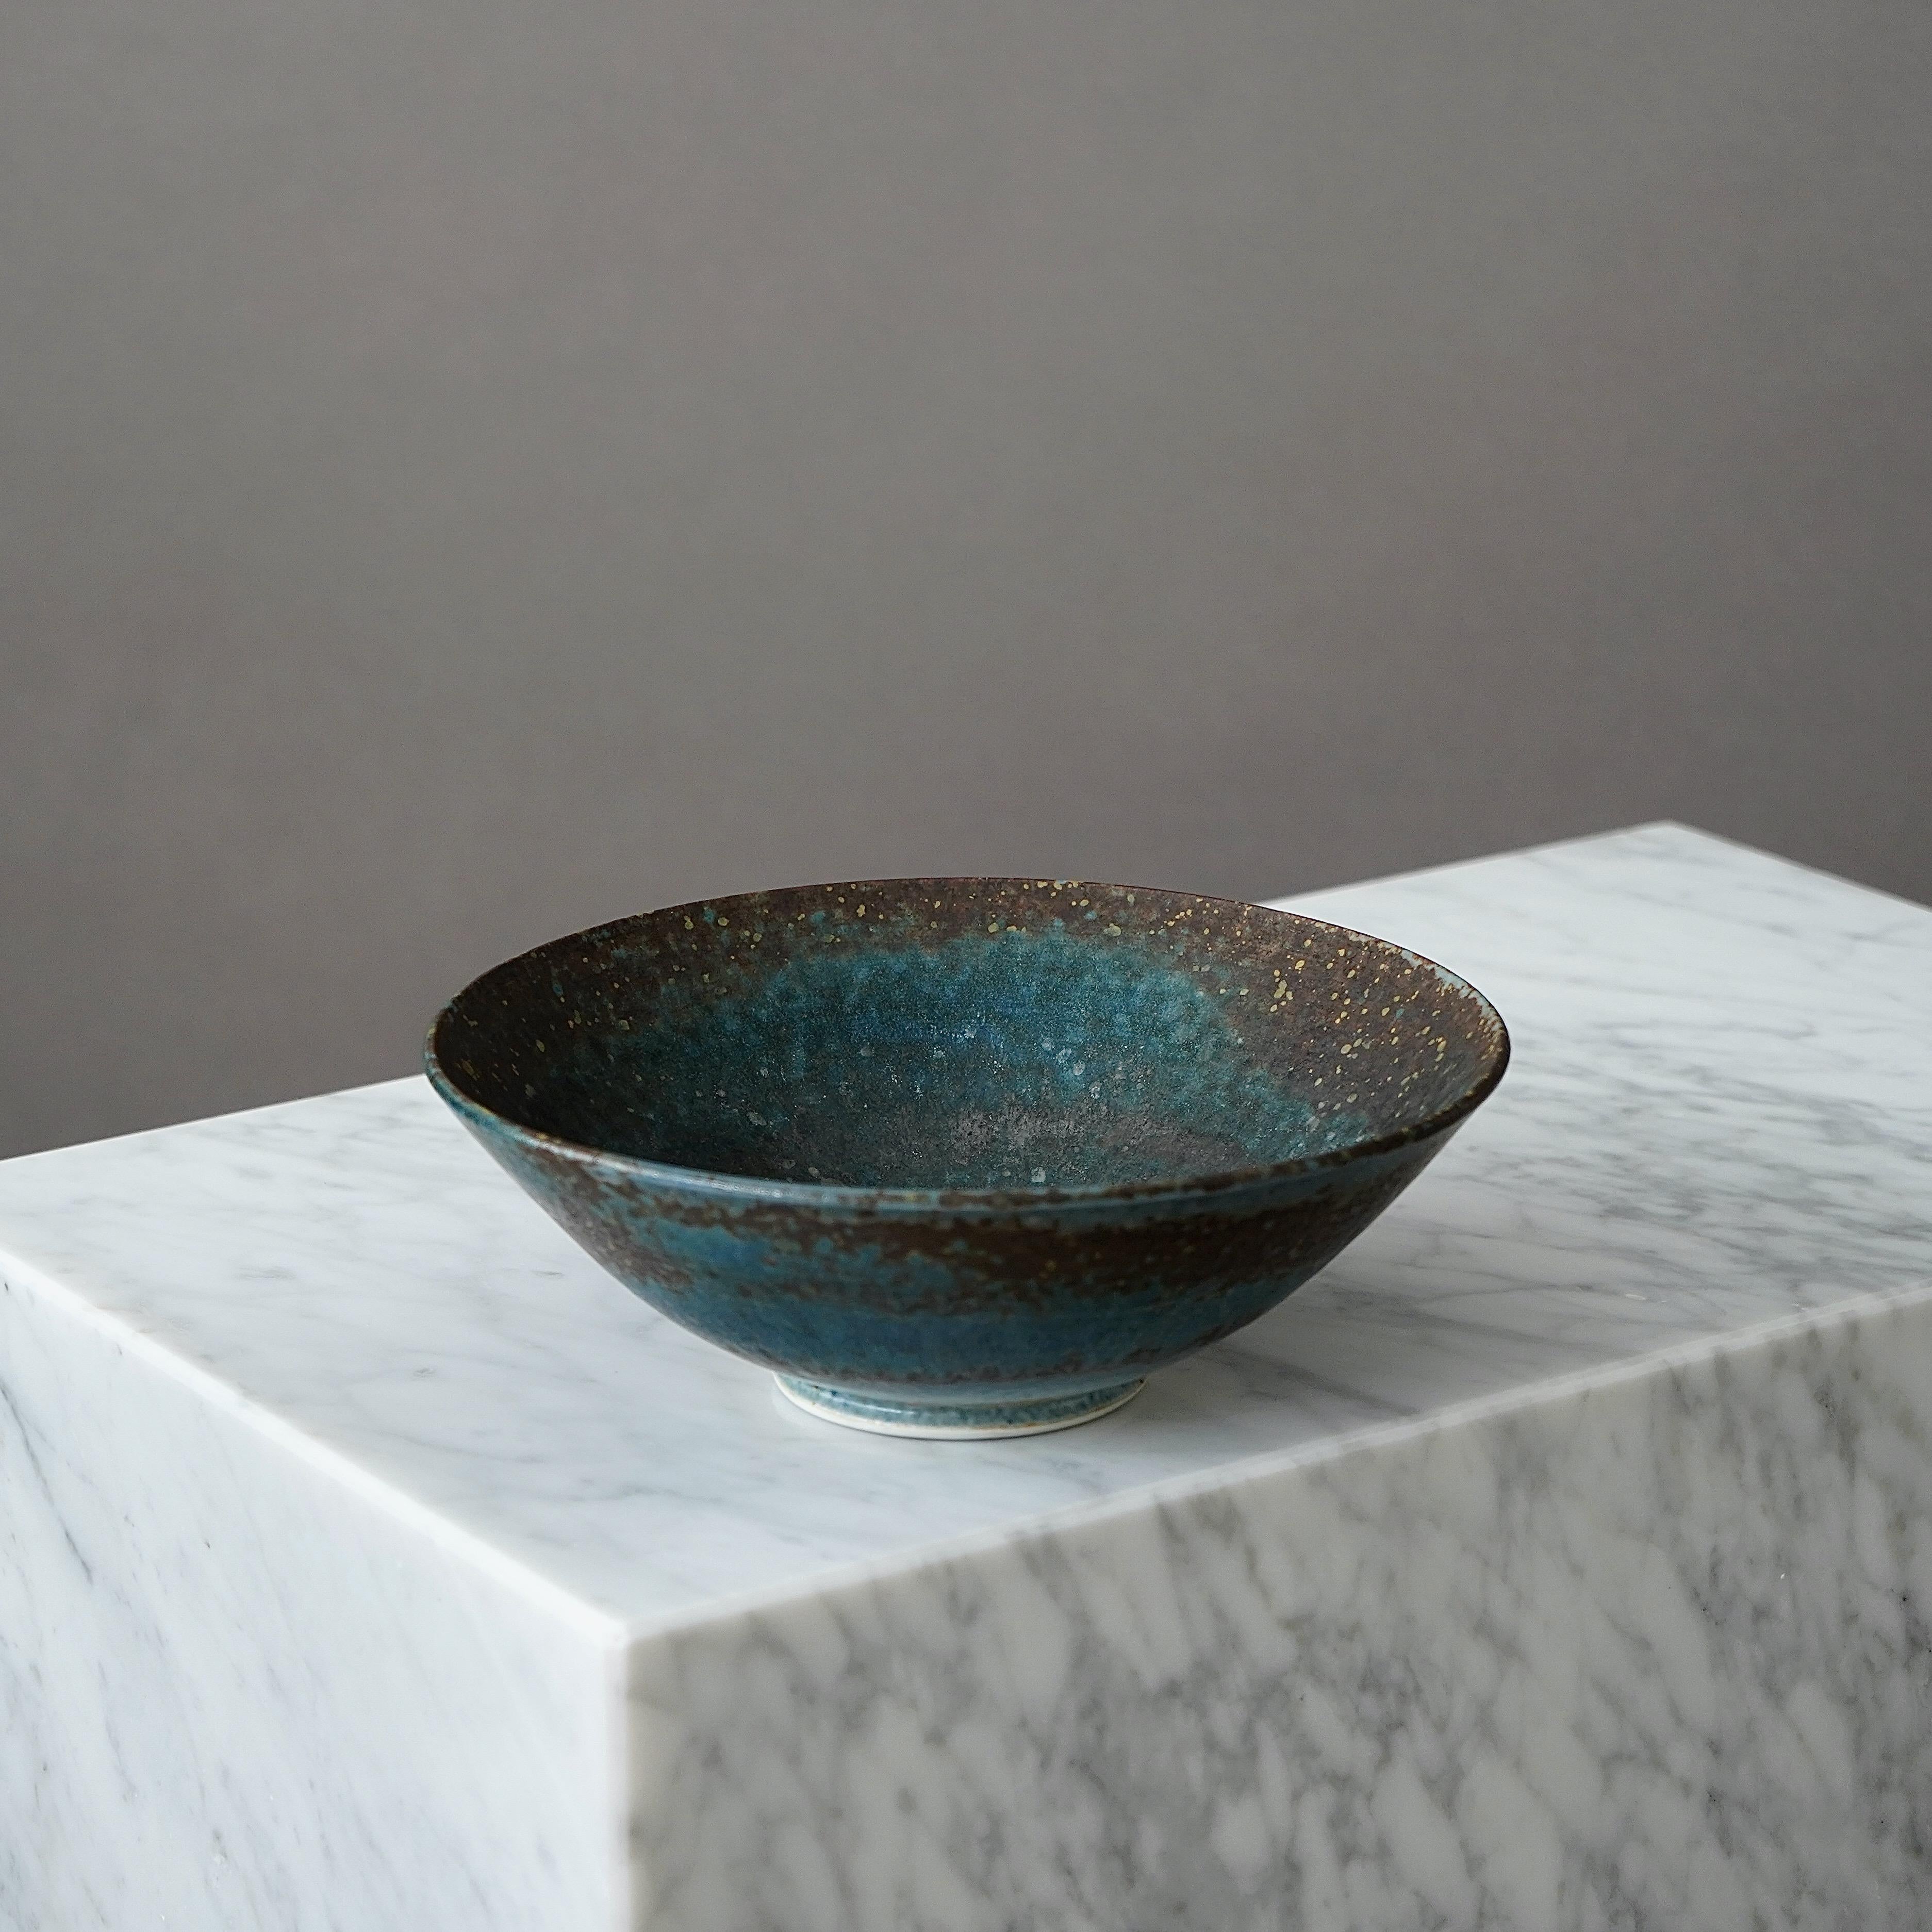 A beautiful and unique hand thrown stoneware bowl, with amazing glaze.
Made by Francesca Mascitti Lindh at Arabia, Finland.

Excellent condition. 
Incised signature 